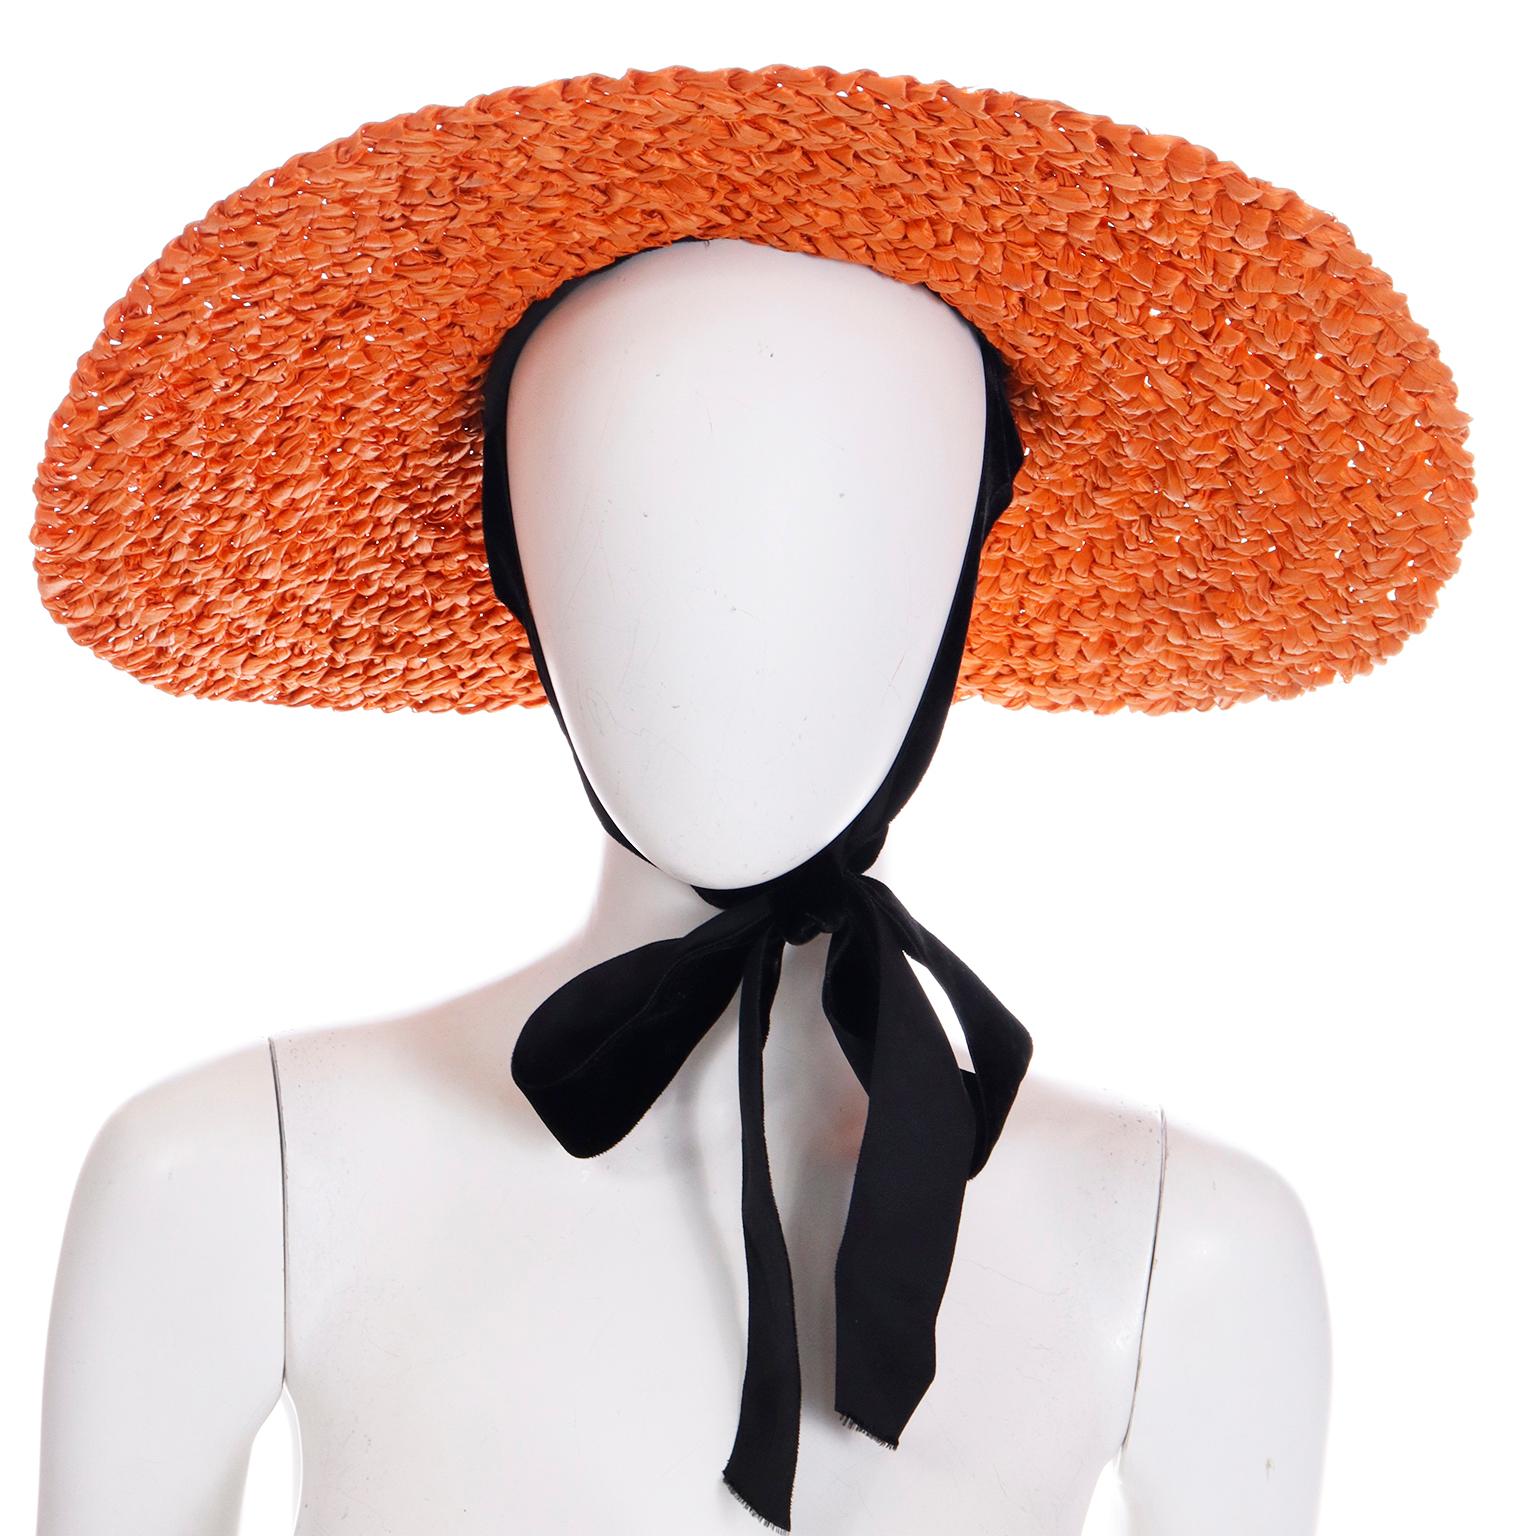 This is such a special vintage late 1930's or early 1940's straw hat from Tailored Woman Fifth Ave at Fifty Seventh Street New York. This fabulous wide brim orange woven straw hat has a pleated black velvet ribbon around the brim with a bow and